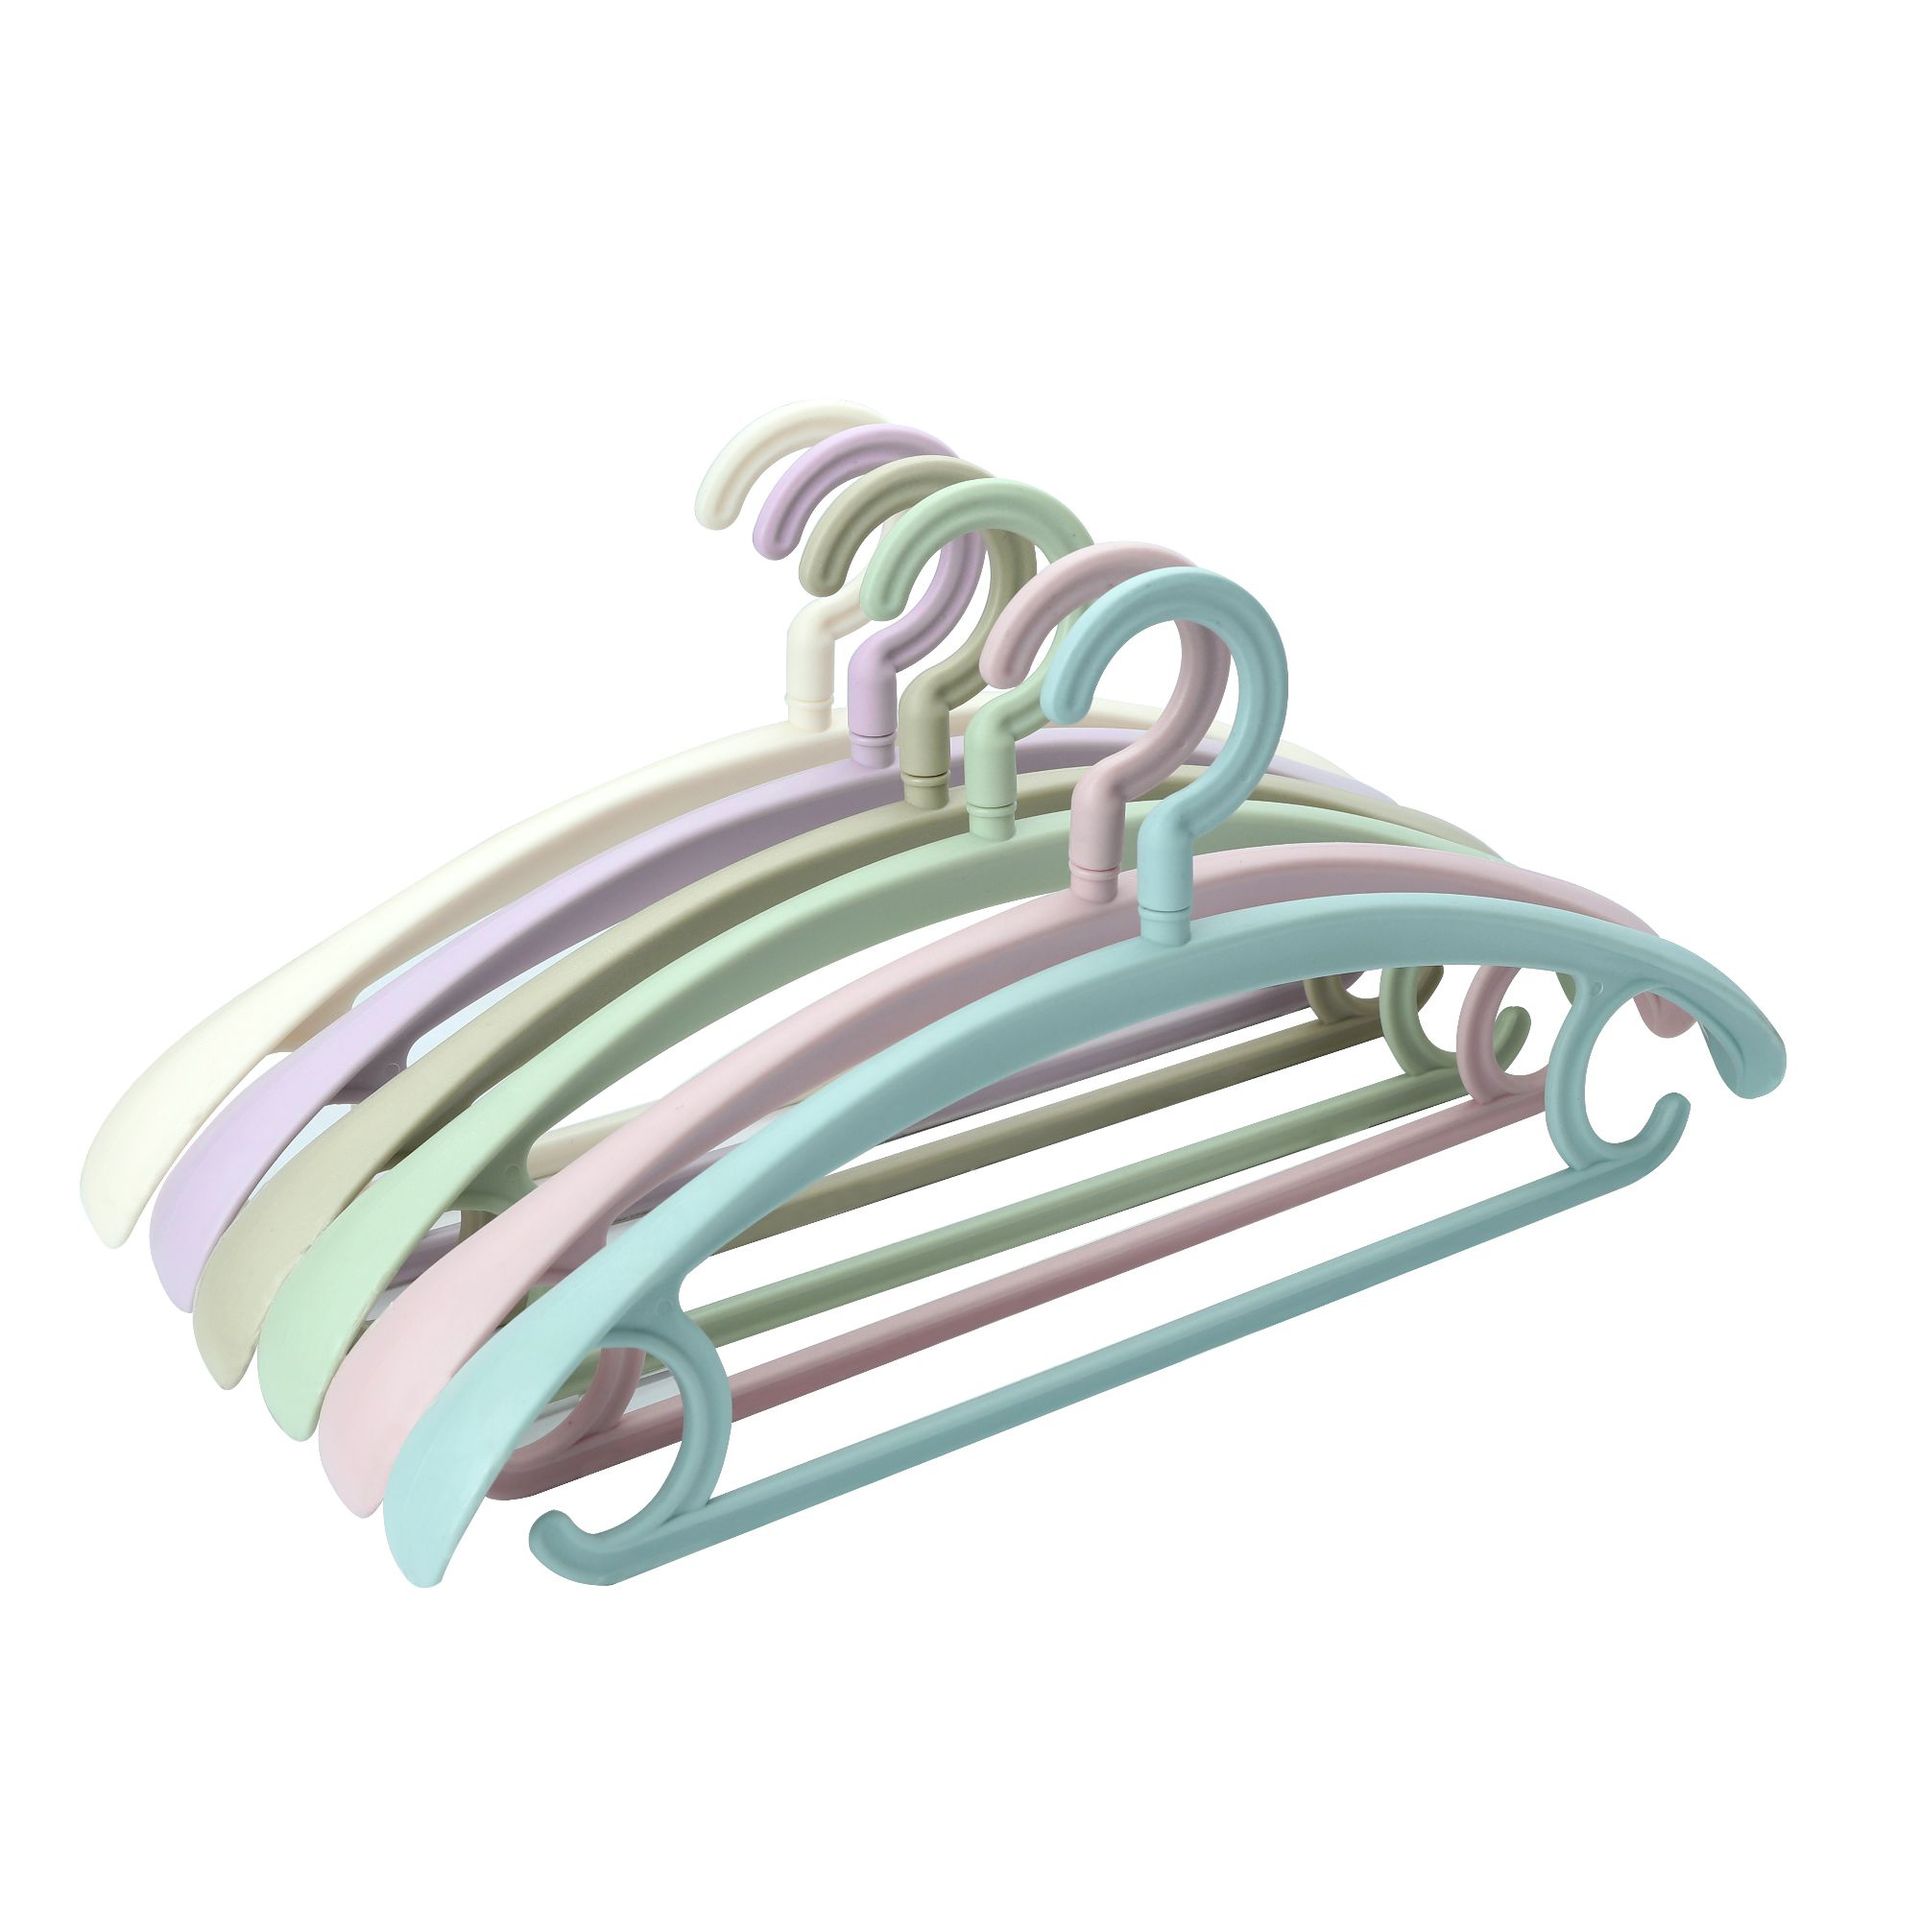 Sturdy Plastic Hanger - Keep Your Clothes Neat and Tidy